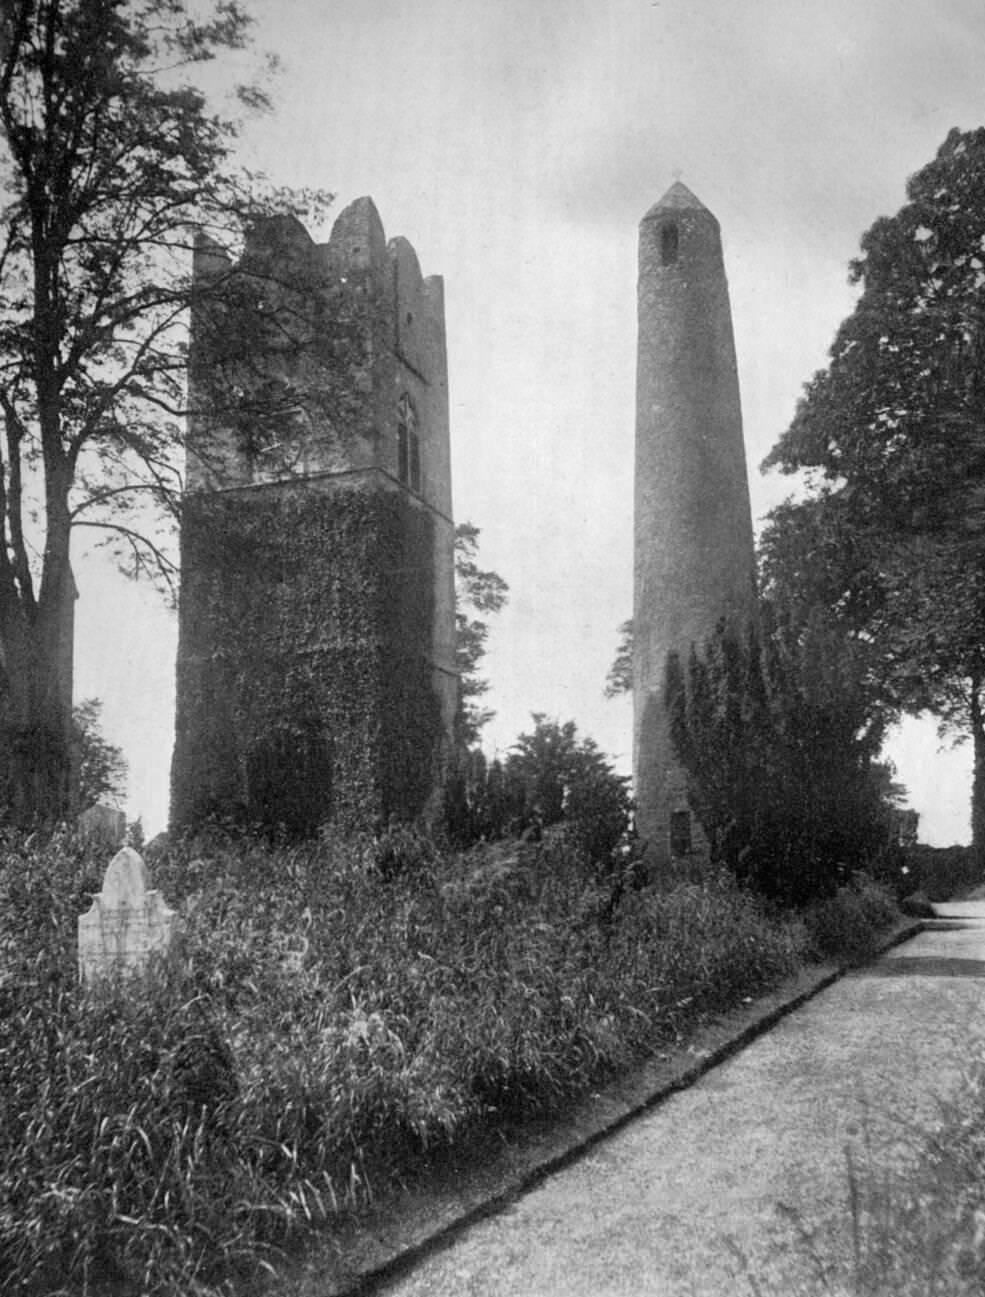 The Round Tower of Swords, Dublin, 1920s.